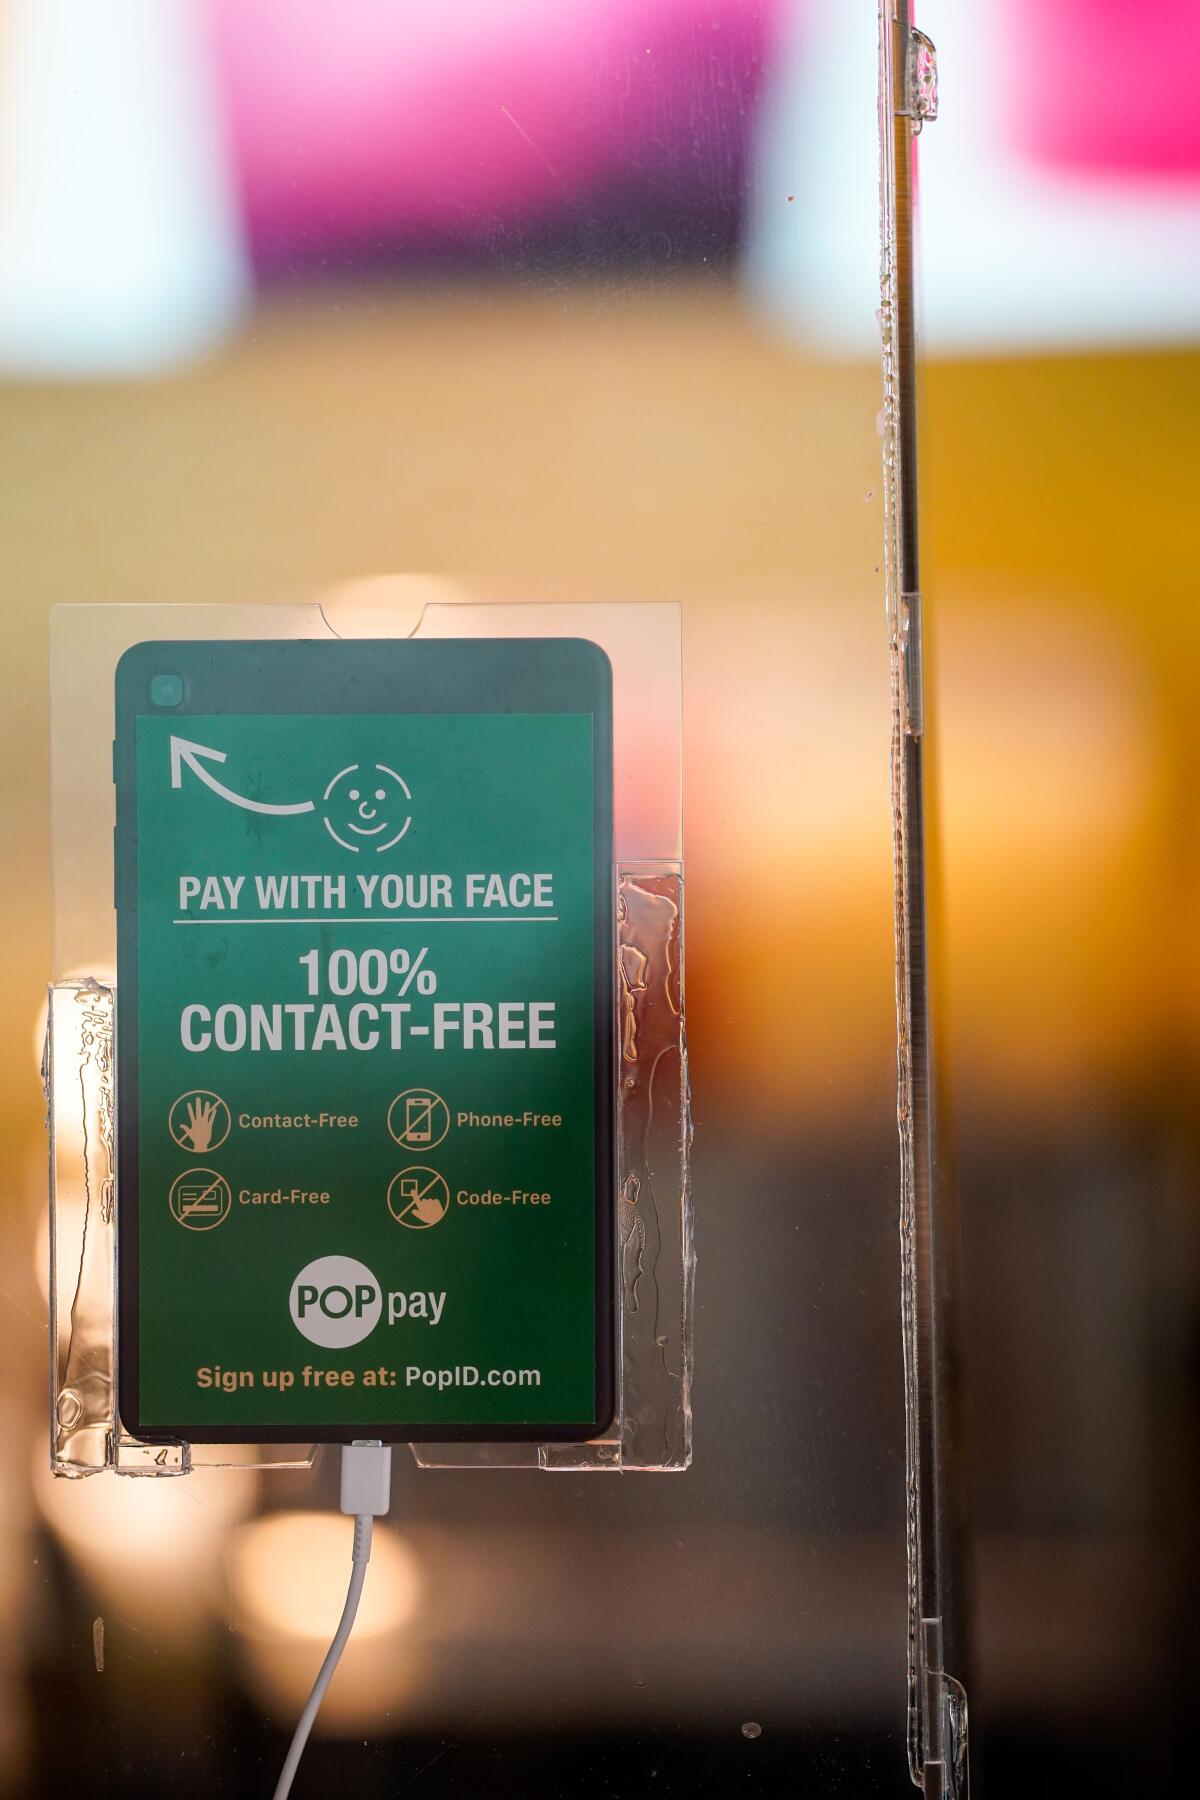 A tablet mounted on a sneeze guard at a Lemonade restaurant advertises the "100% contact-free" Pop Pay system